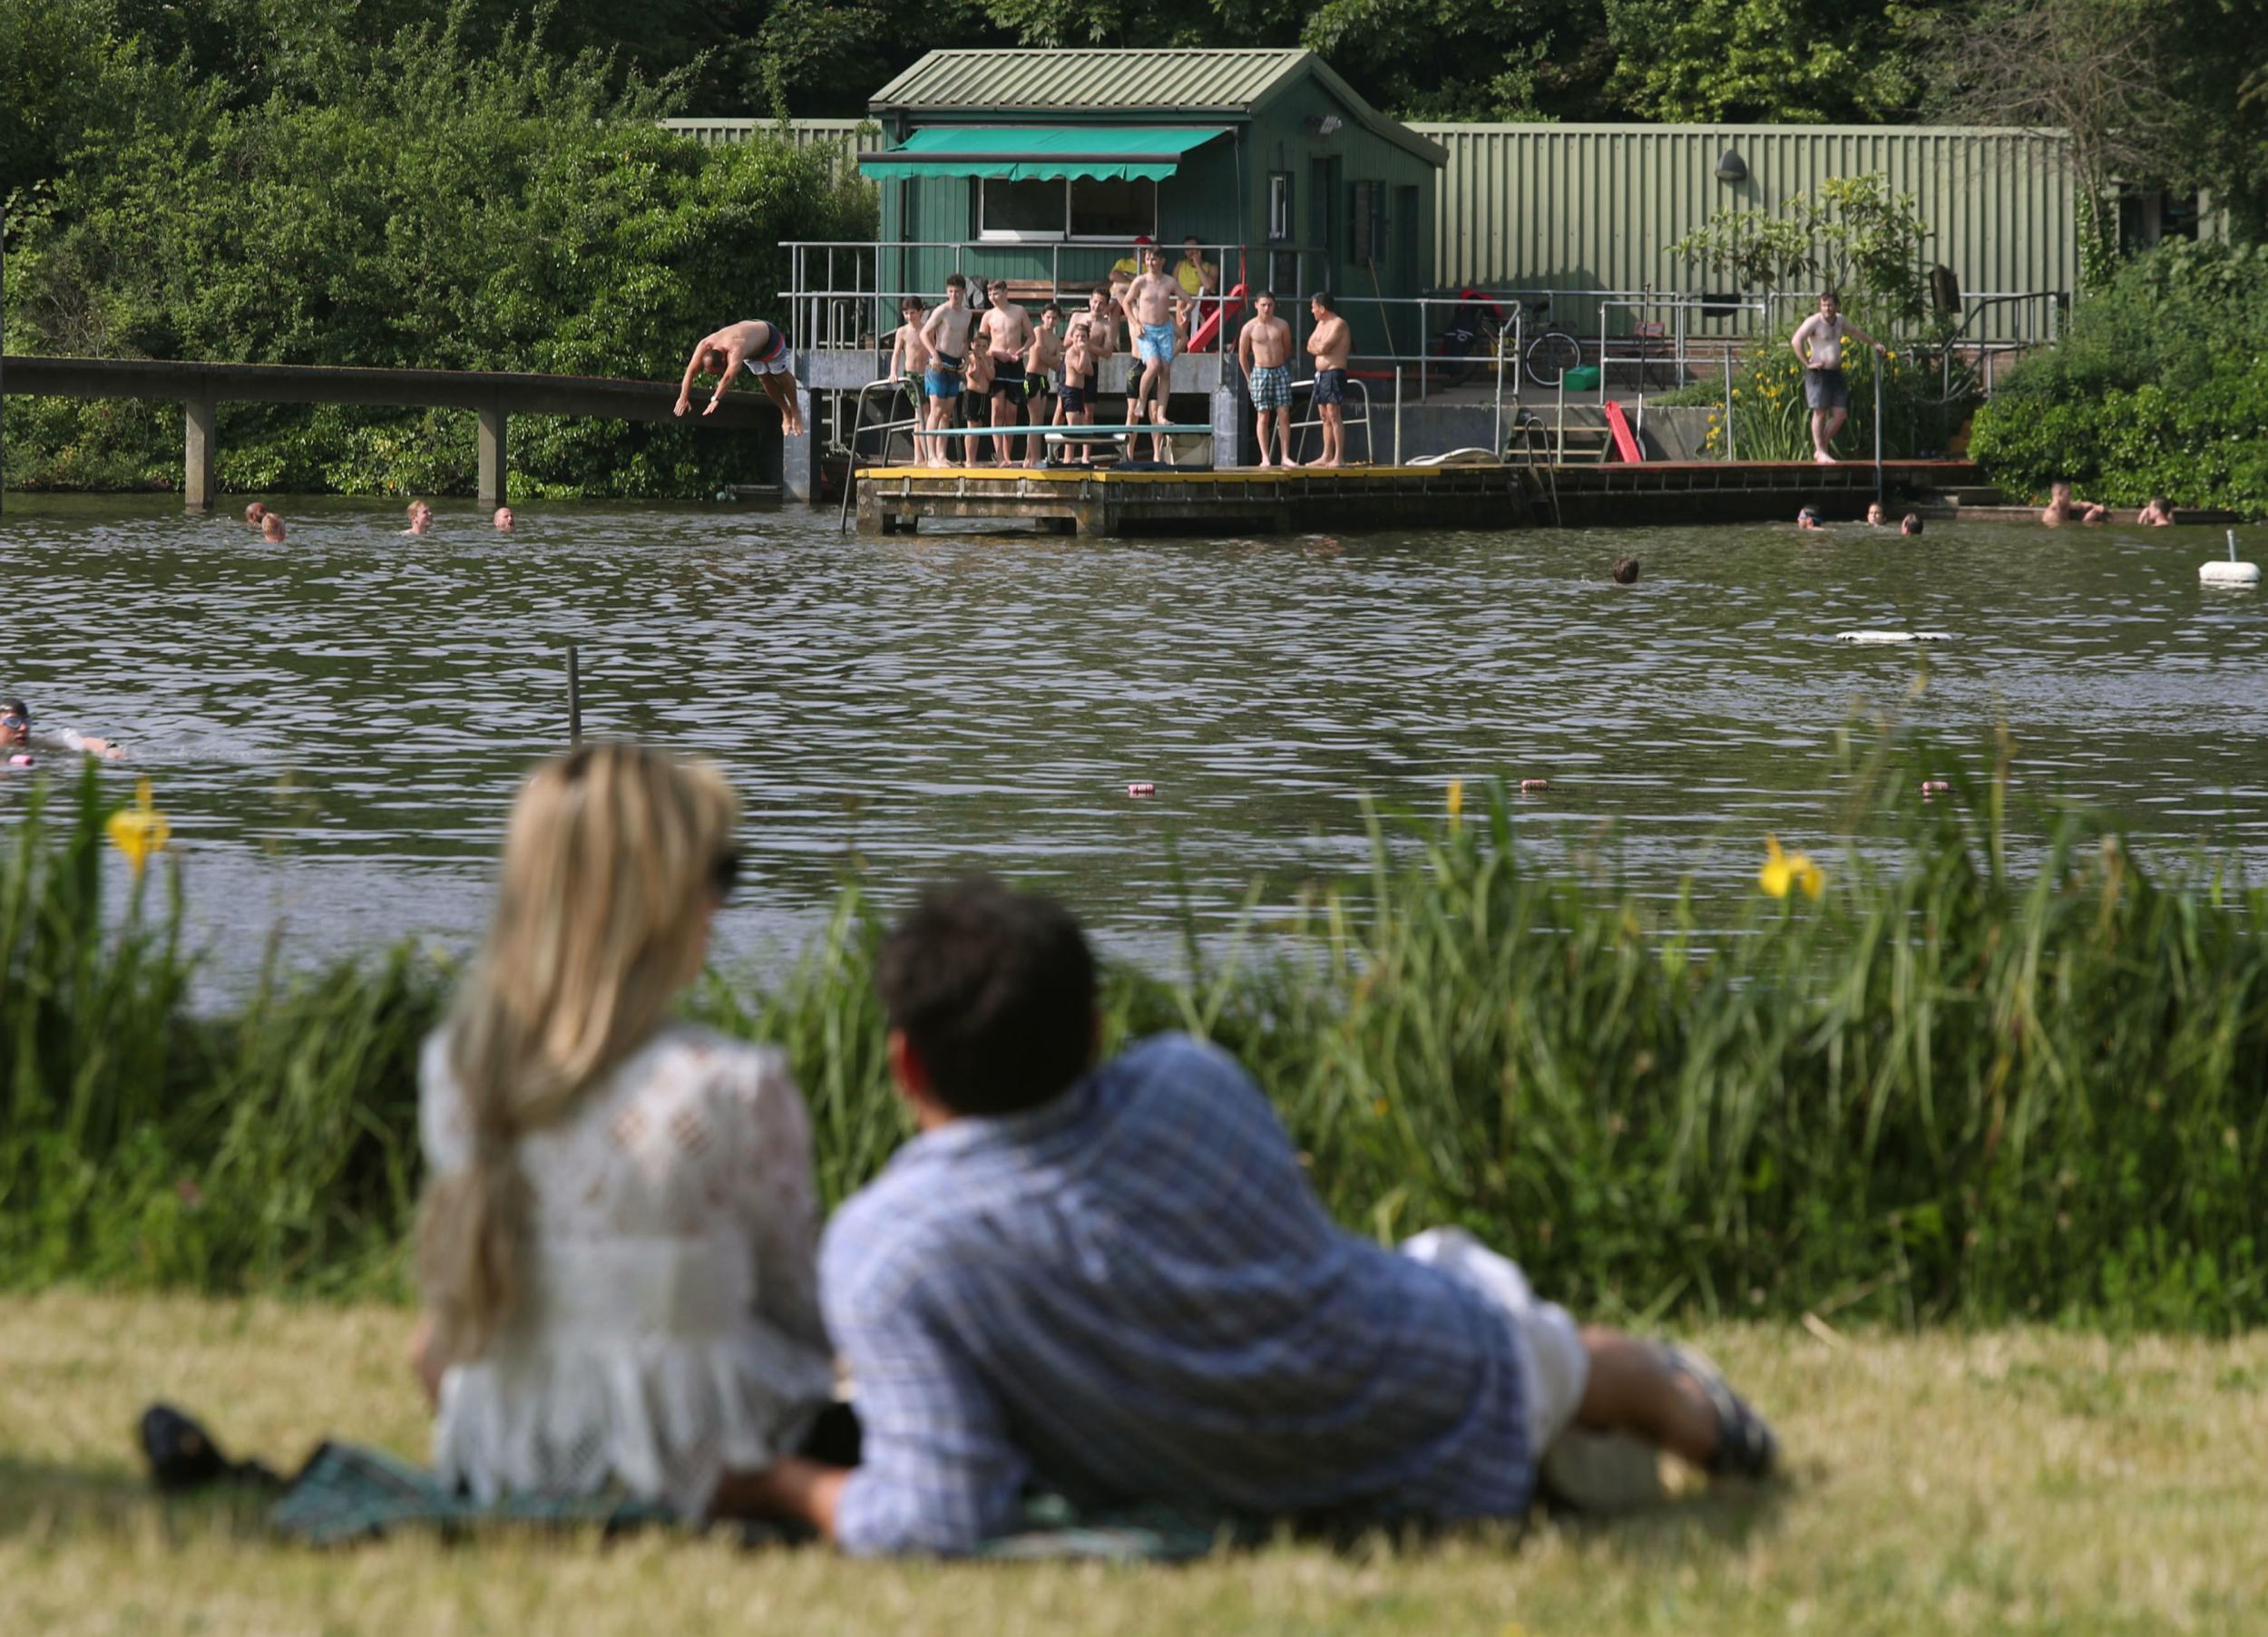 Around 20 members of the Man Friday group took to the male-only bathing pool on Hampstead Heath